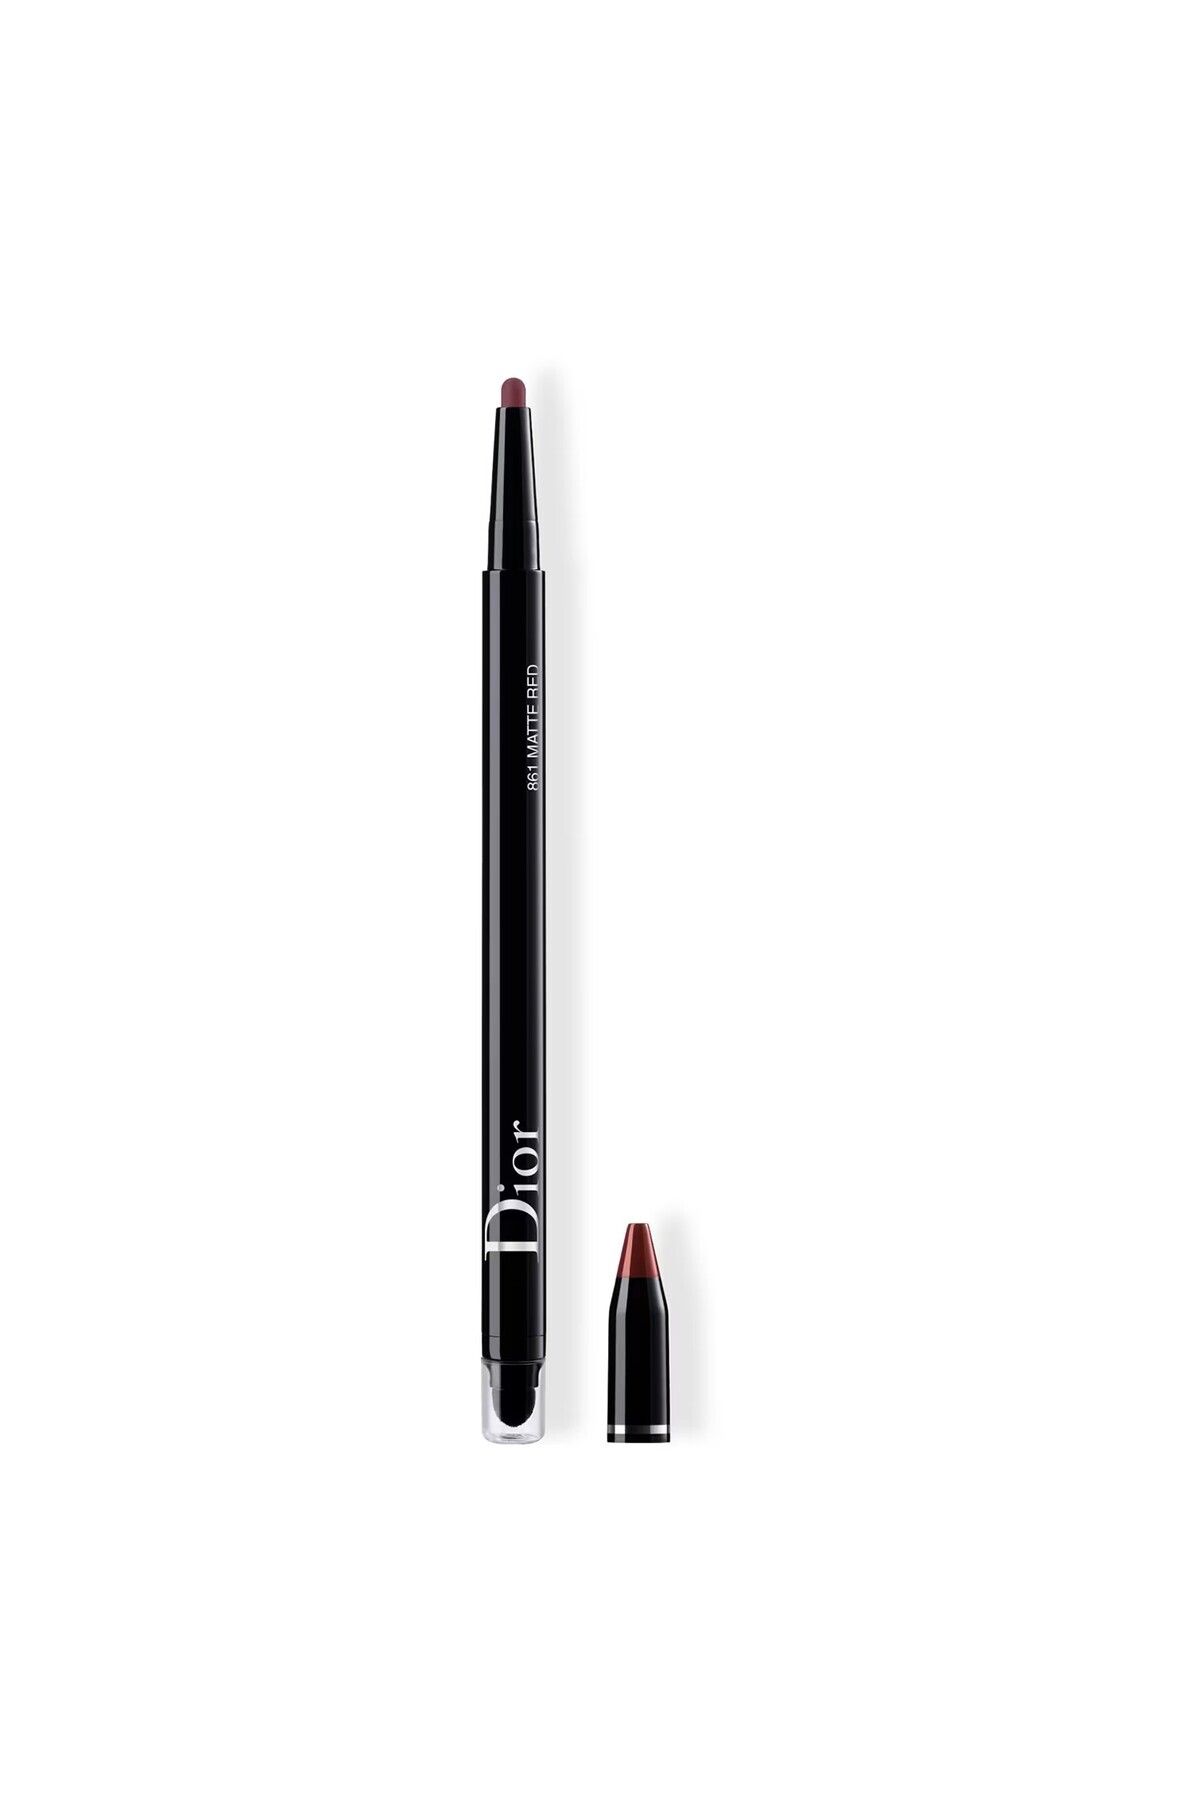 Dior 24H*STYLO WATERPROOF -WEAR-LASTİNG PROTECTİON FOR UP TO 24 HOURS, MATTE EYELİNER PSSN1968